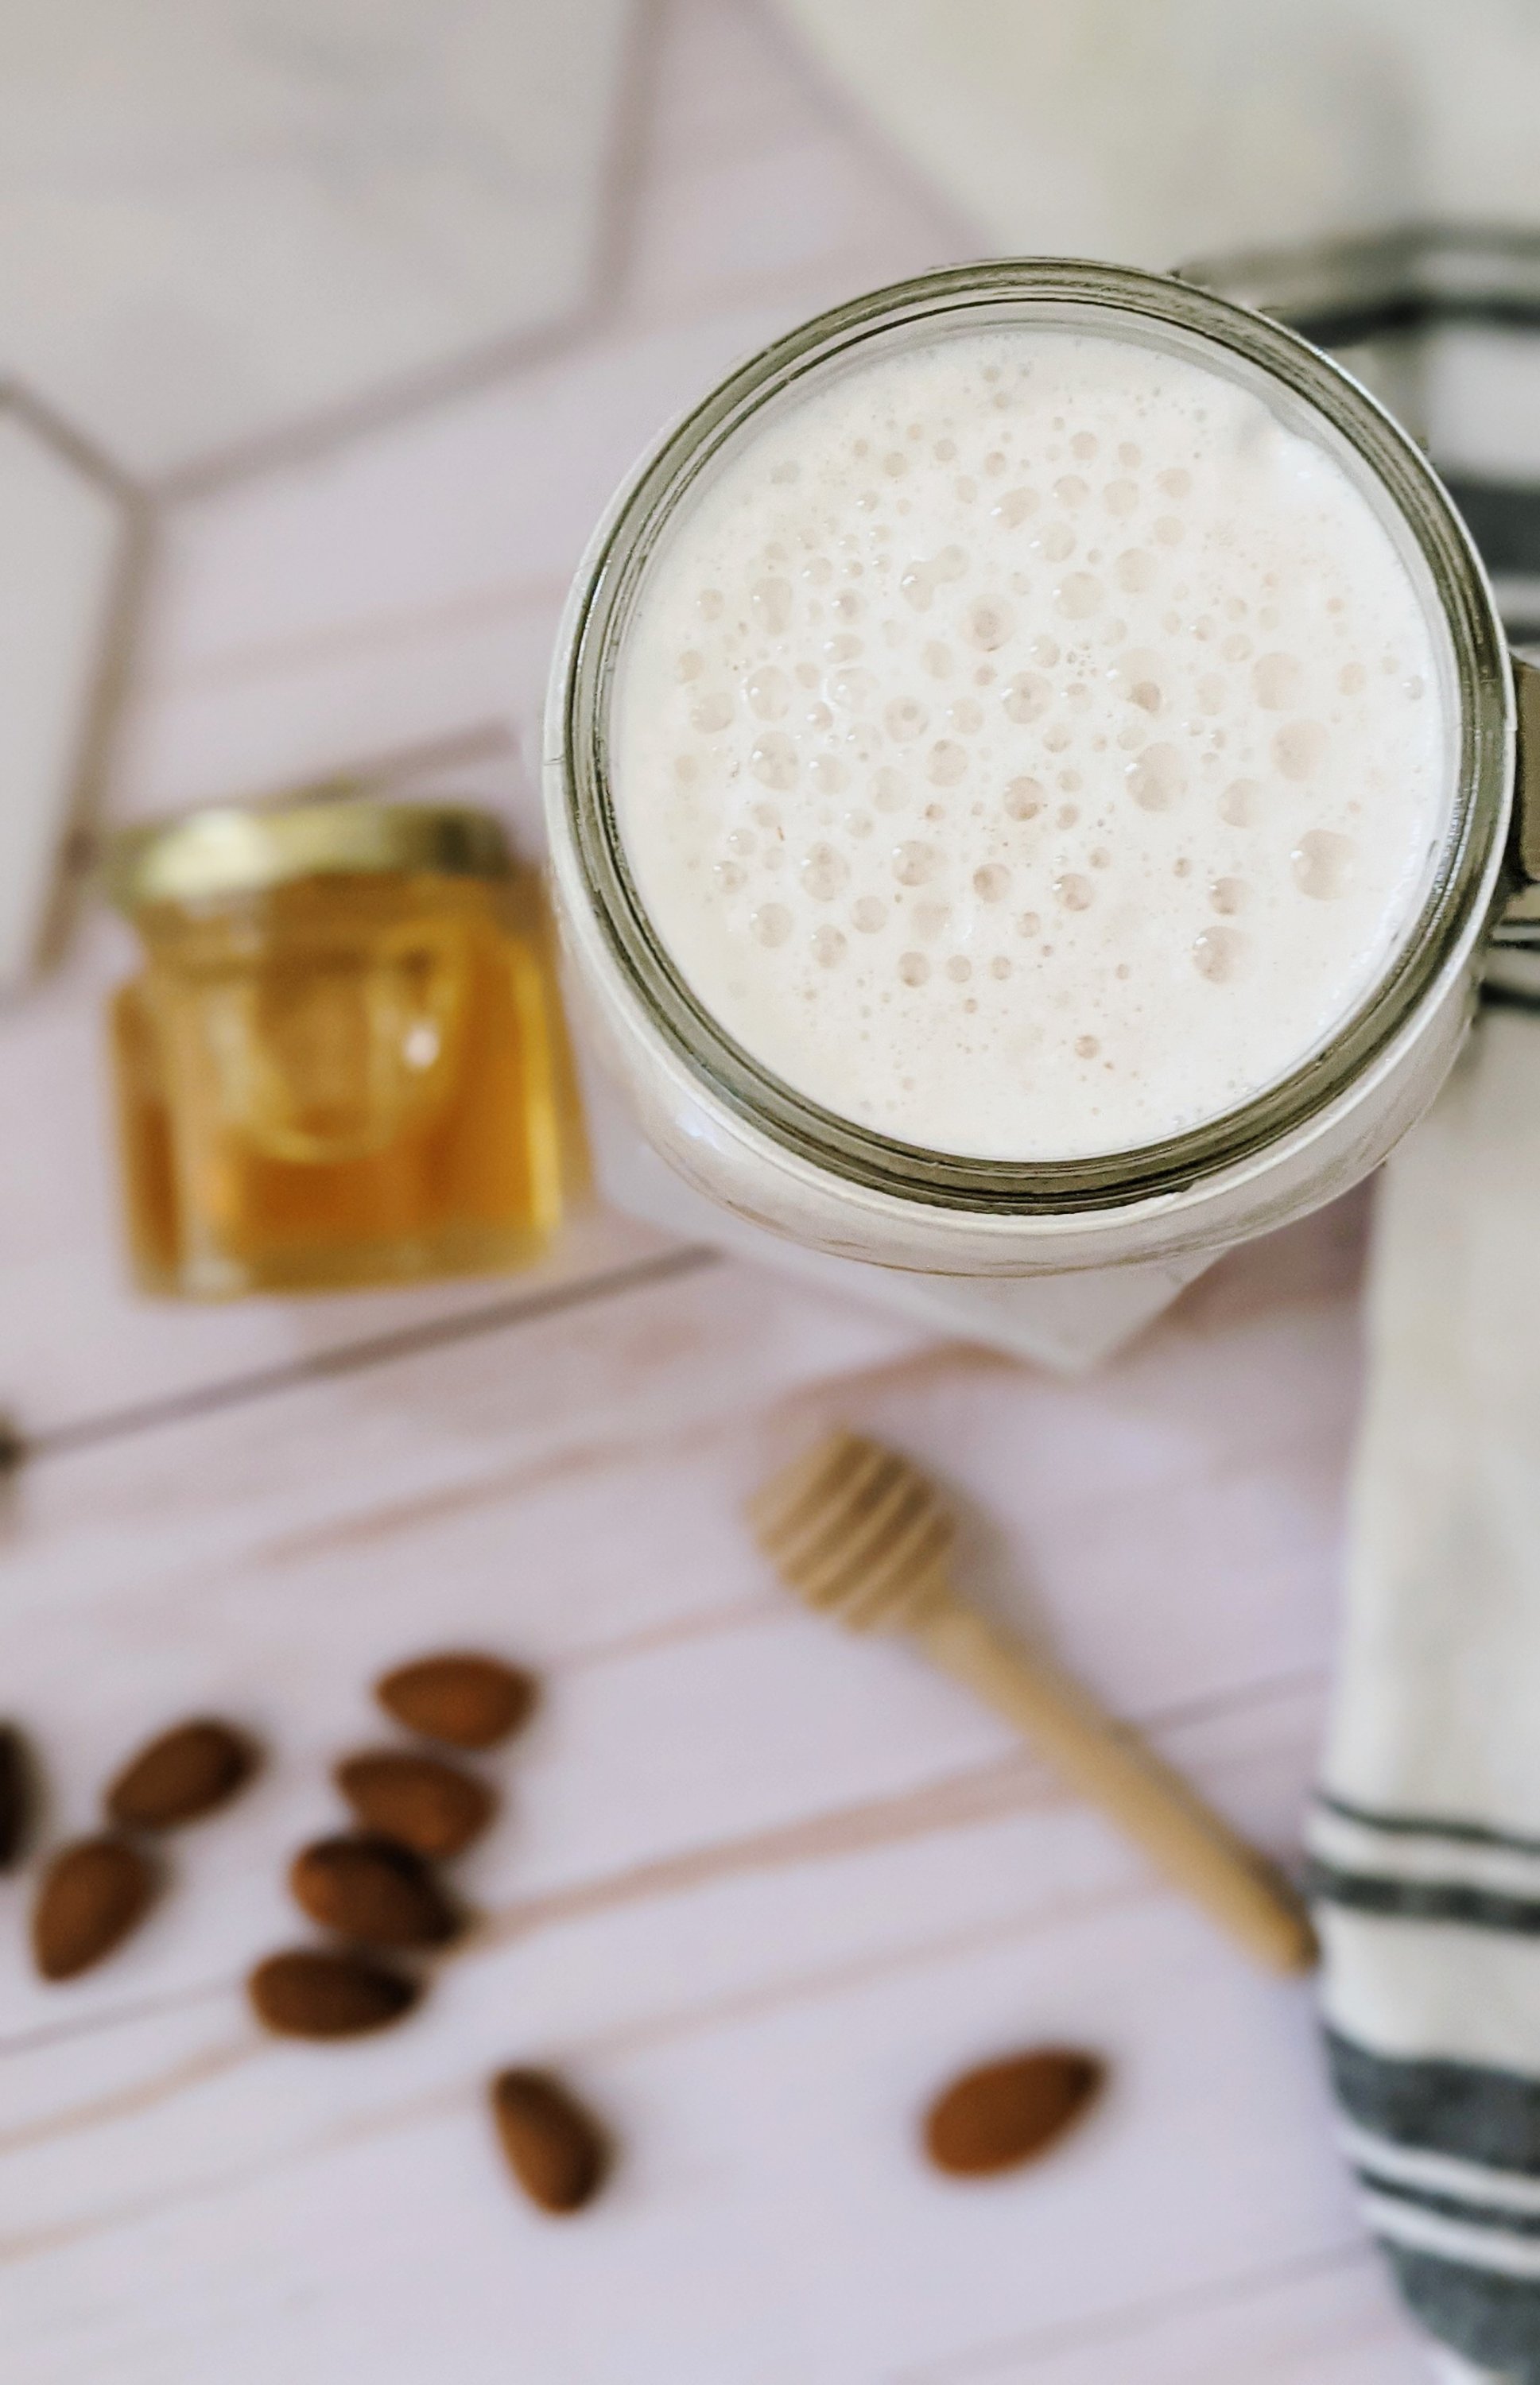 plant based honey almond milk recipes naturally sweetened with agave nectar for a vegan version plant based gluten free vegetarian